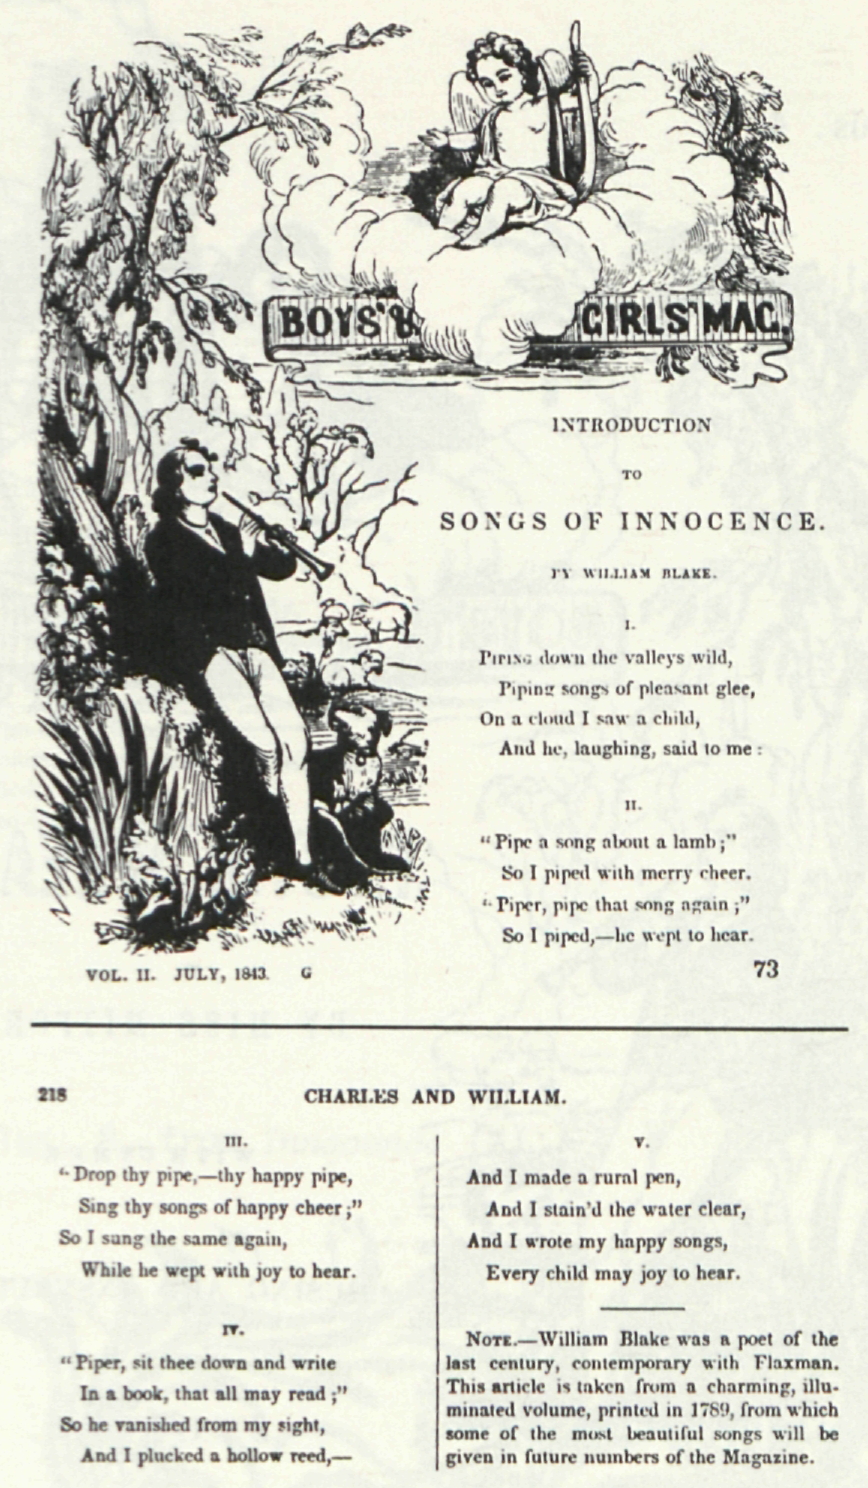 BOYS’ & GIRLS’ MAG.
                    	
                    	INTRODUCTION
                    	TO
                    	SONGS OF INNOCENCE.
                    	
                    	BY WILLIAM BLAKE.
                    	
                    	I.
                    	PIPING down the valleys wild,
                    	Piping songs of pleasant glee,
                    	On a cloud I saw a child,
                    	And he, laughing, said to me:
                    	
                    	II.
                    	“Pipe a song about a lamb;”
                    	So I piped with merry cheer.
                    	“Piper, pipe that song again;”
                    	So I piped,—he wept to hear.
                    	
                    	VOL. II.   JULY, 1843.   G
                    	
                    	73
                    	
                    	
                    	
                    	218
                    	CHARLES AND WILLIAM.
                    	
                    	III.
                    	“Drop thy pipe,—thy happy pipe,
                    	Sing thy songs of happy cheer;”
                    	So I sung the same again,
                    	While he wept with joy to hear.
                    	
                    	IV.
                    	“Piper, sit thee down and write
                    	In a book, that all may read;”
                    	So he vanished from my sight,
                    	And I plucked a hollow reed,—
                    	
                    	V.
                    	And I made a rural pen,
                    	And I stain’d the water clear,
                    	And I wrote my happy songs,
                    	Every child may joy to hear.
                    	
                    	NOTE.—William Blake was a poet of the 
                    	last century, contemporary with Flaxman.
                    	This article is taken from a charming, illuminated
                    	volume, printed in 1789, from which
                    	some of the most beautiful songs will be
                    	given in future numbers of the Magazine.